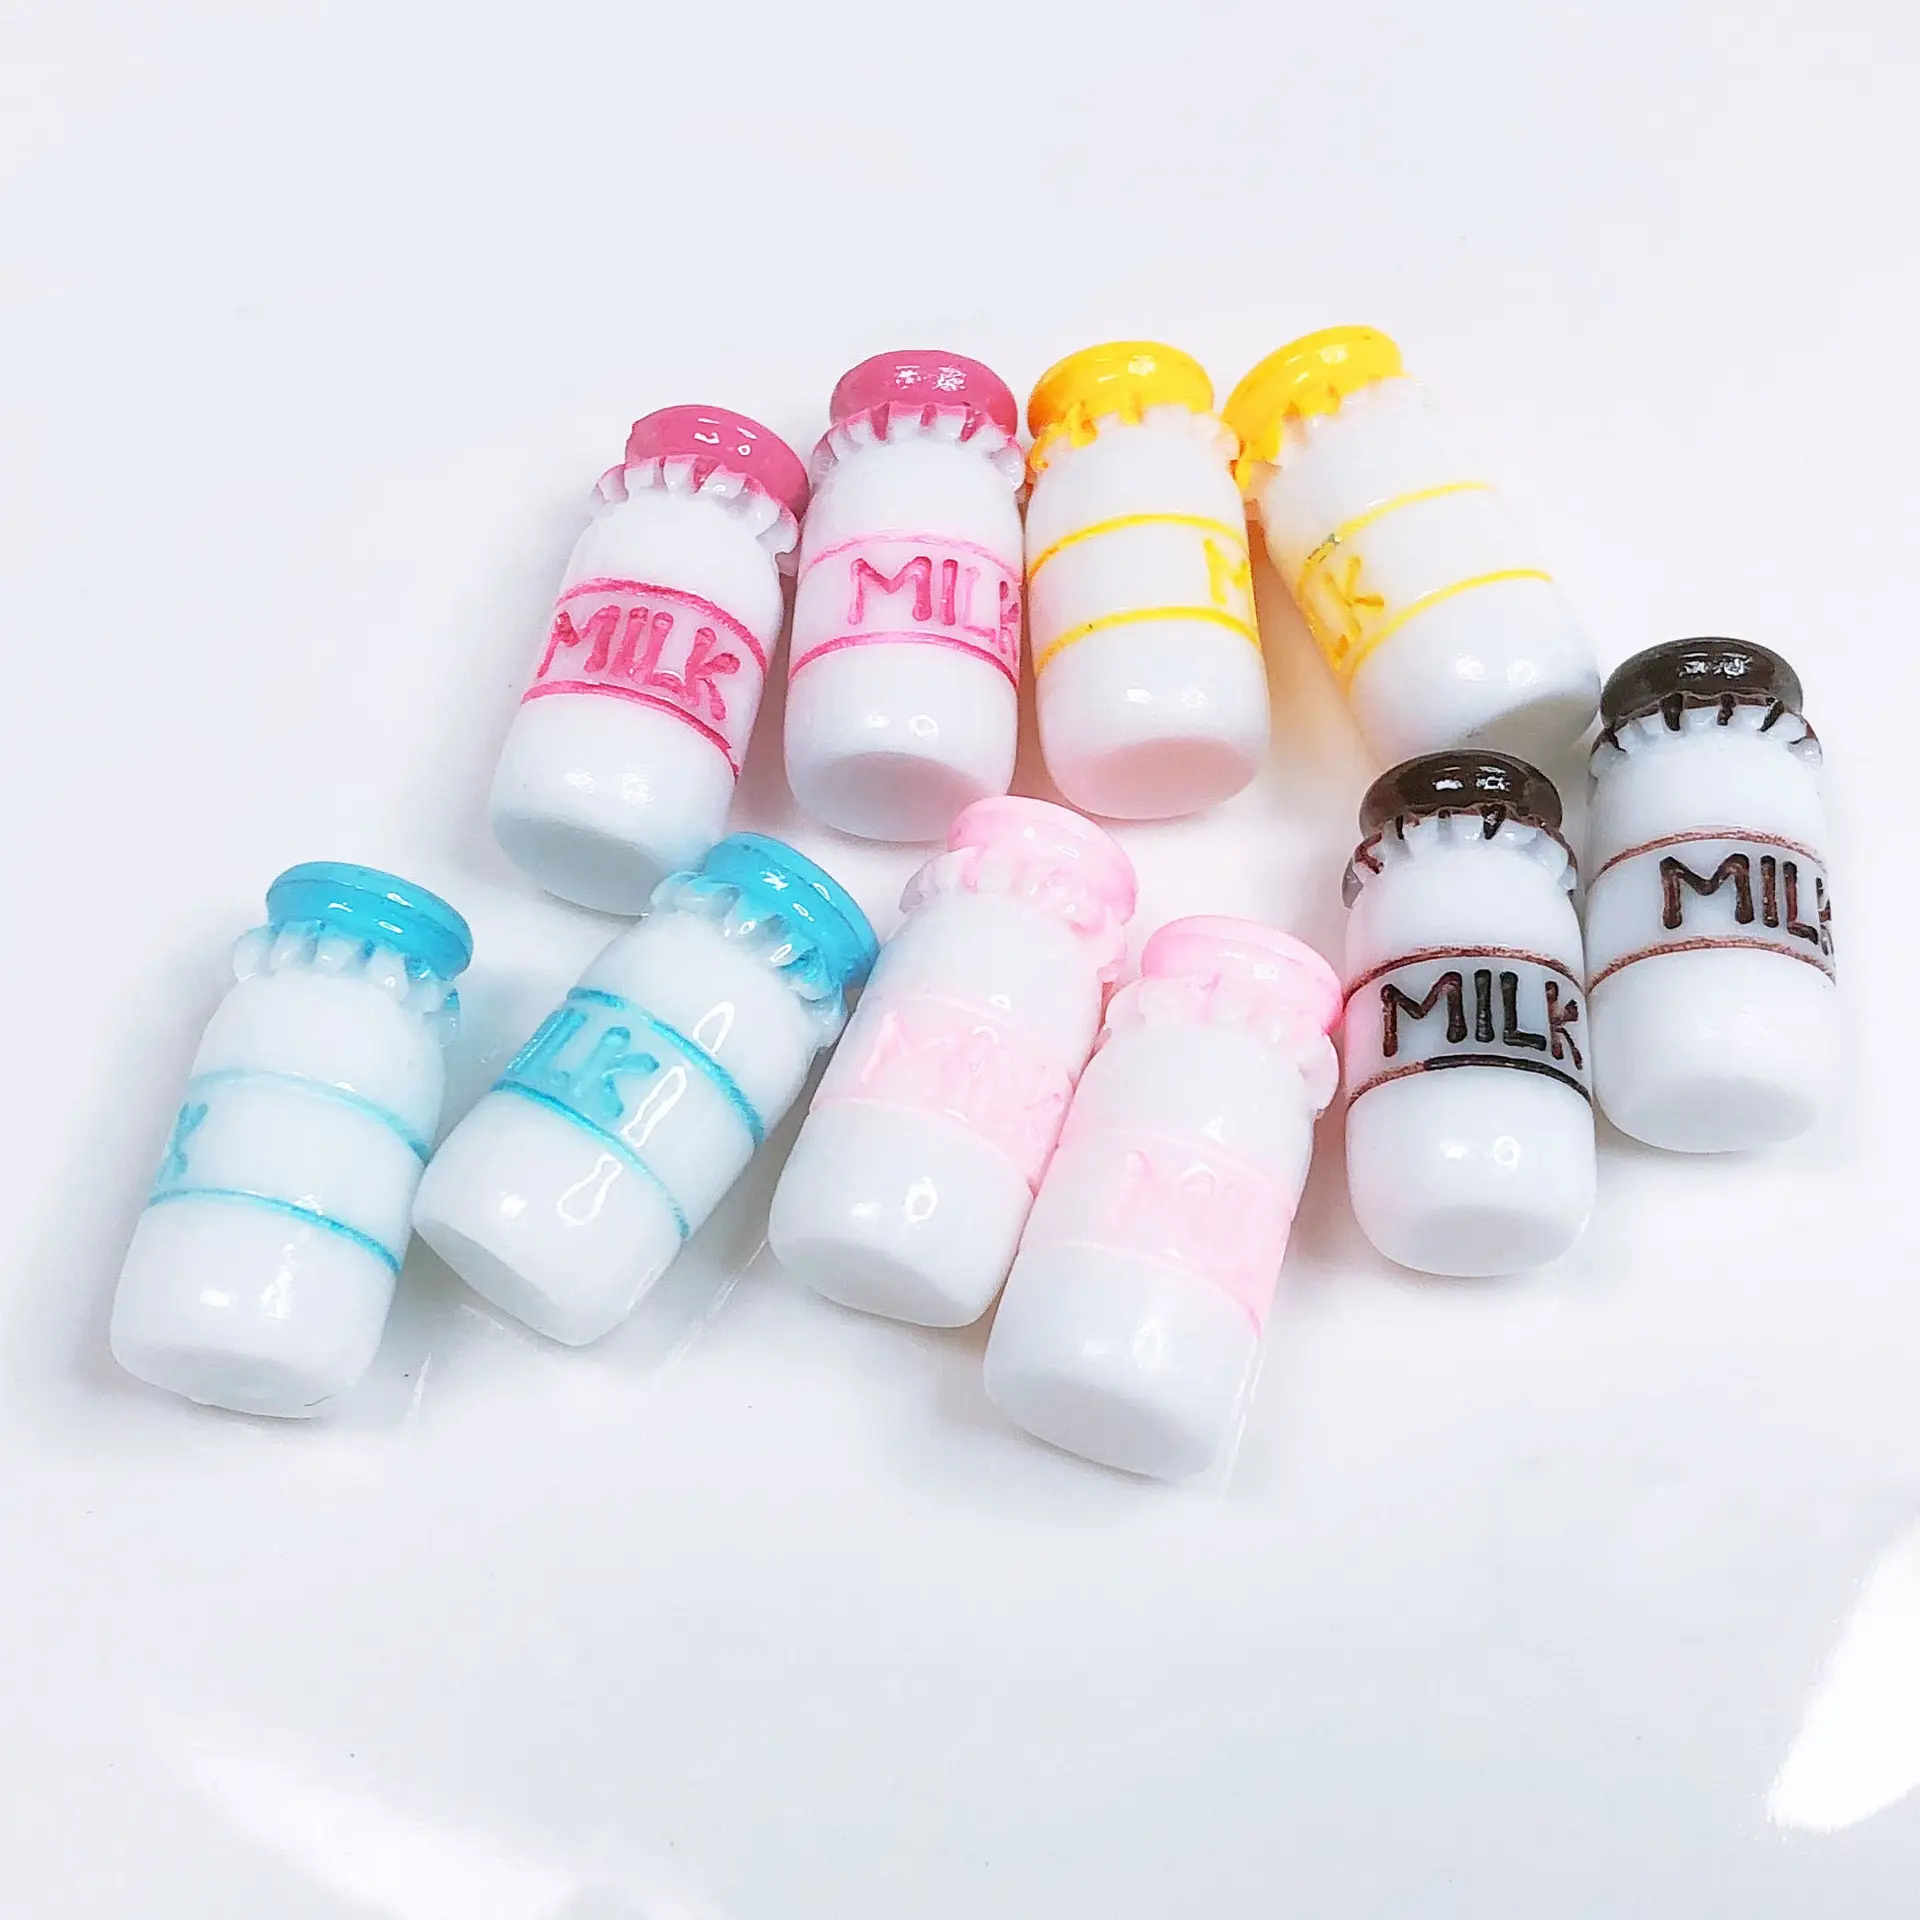 lovely hand paint craft 3d simulation miniature milk bottle design resin cabochons for keychain